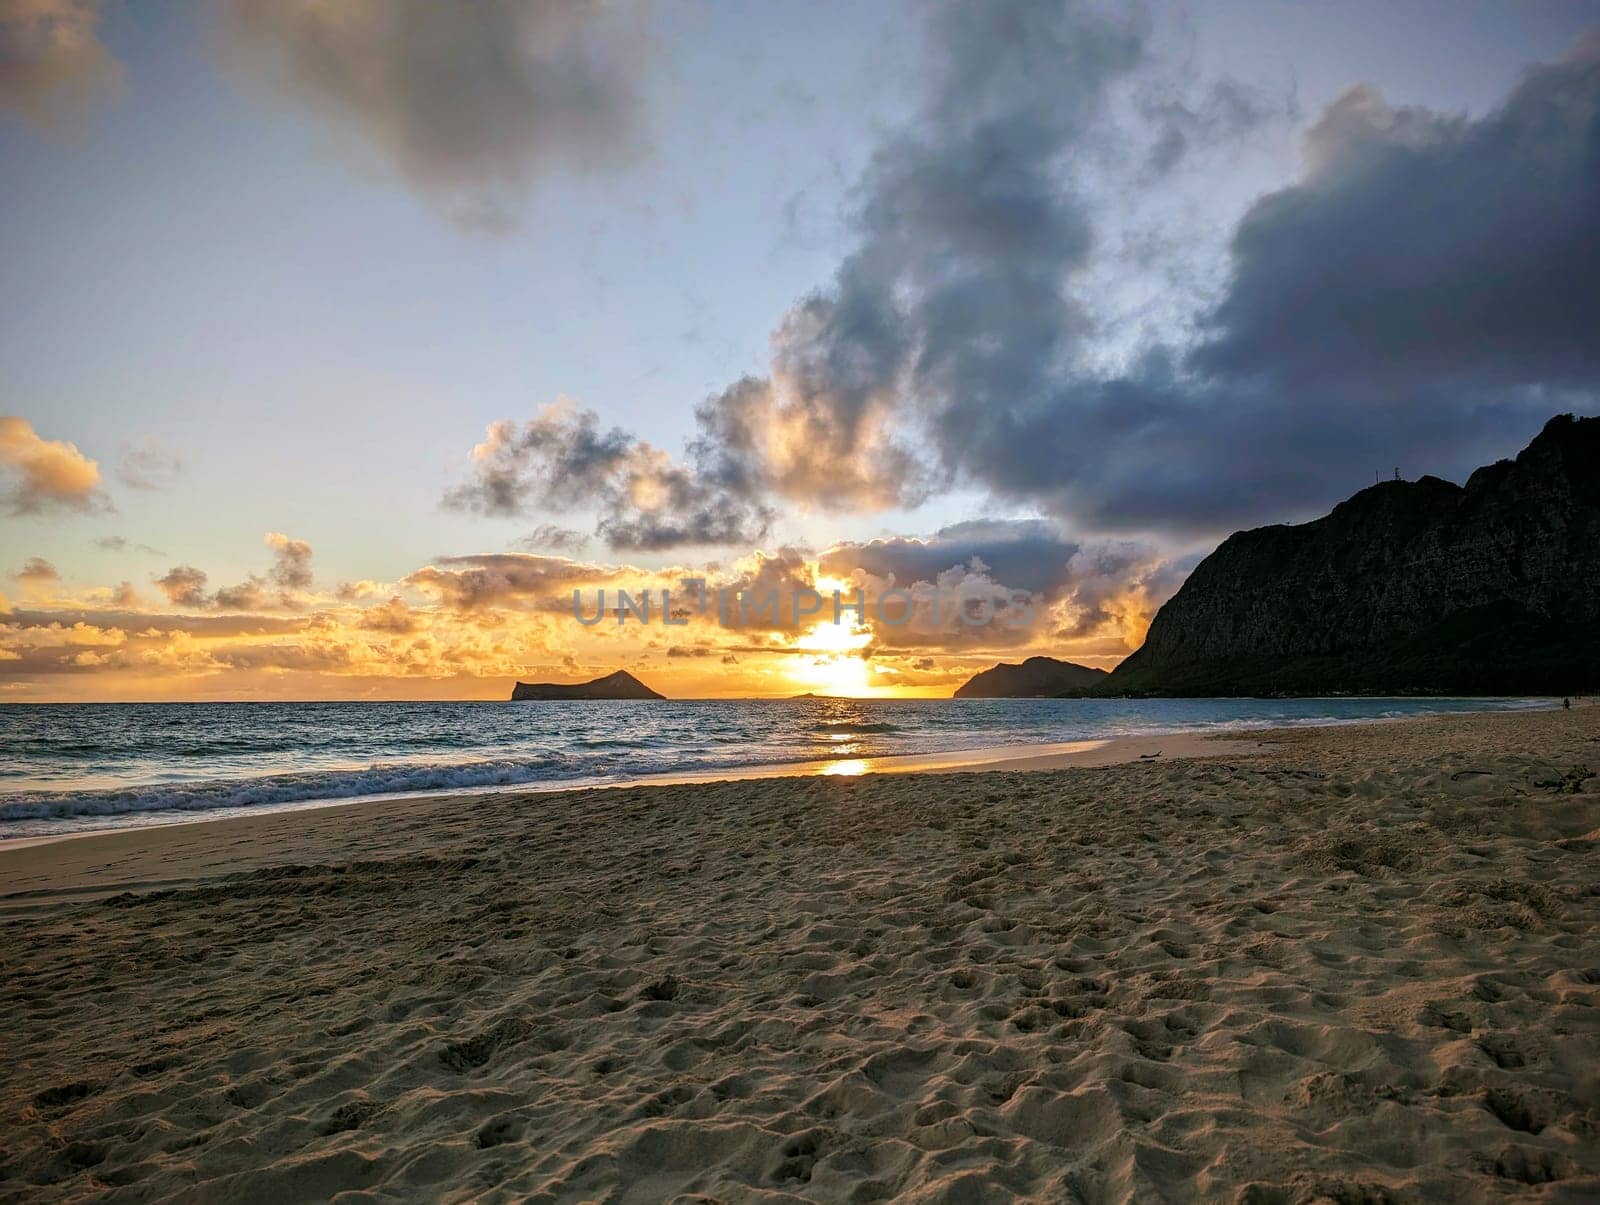 Sunrise on Waimanalo Beach, a long and sandy beach on the eastern coast of Oʻahu, Hawaii. The photo was taken from the perspective of someone standing on the beach, looking at the orange sun rising over the calm ocean. The sky is a mix of orange, pink, and blue colors, and there are a few clouds in the sky. 